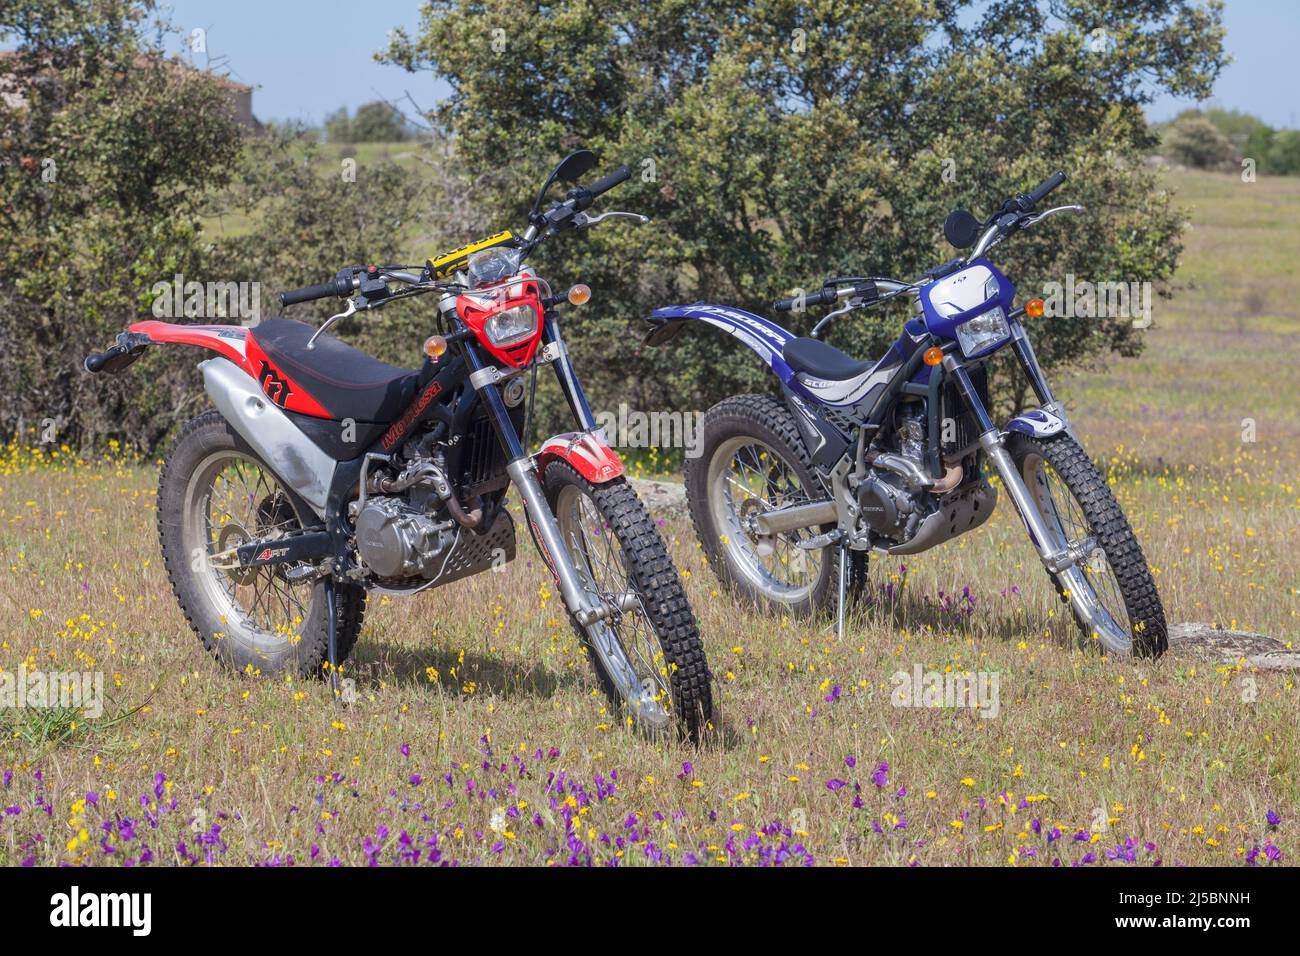 Merida, Spain - April 10th, 2022: Motorcycle trial bikes standing on country Stock Photo